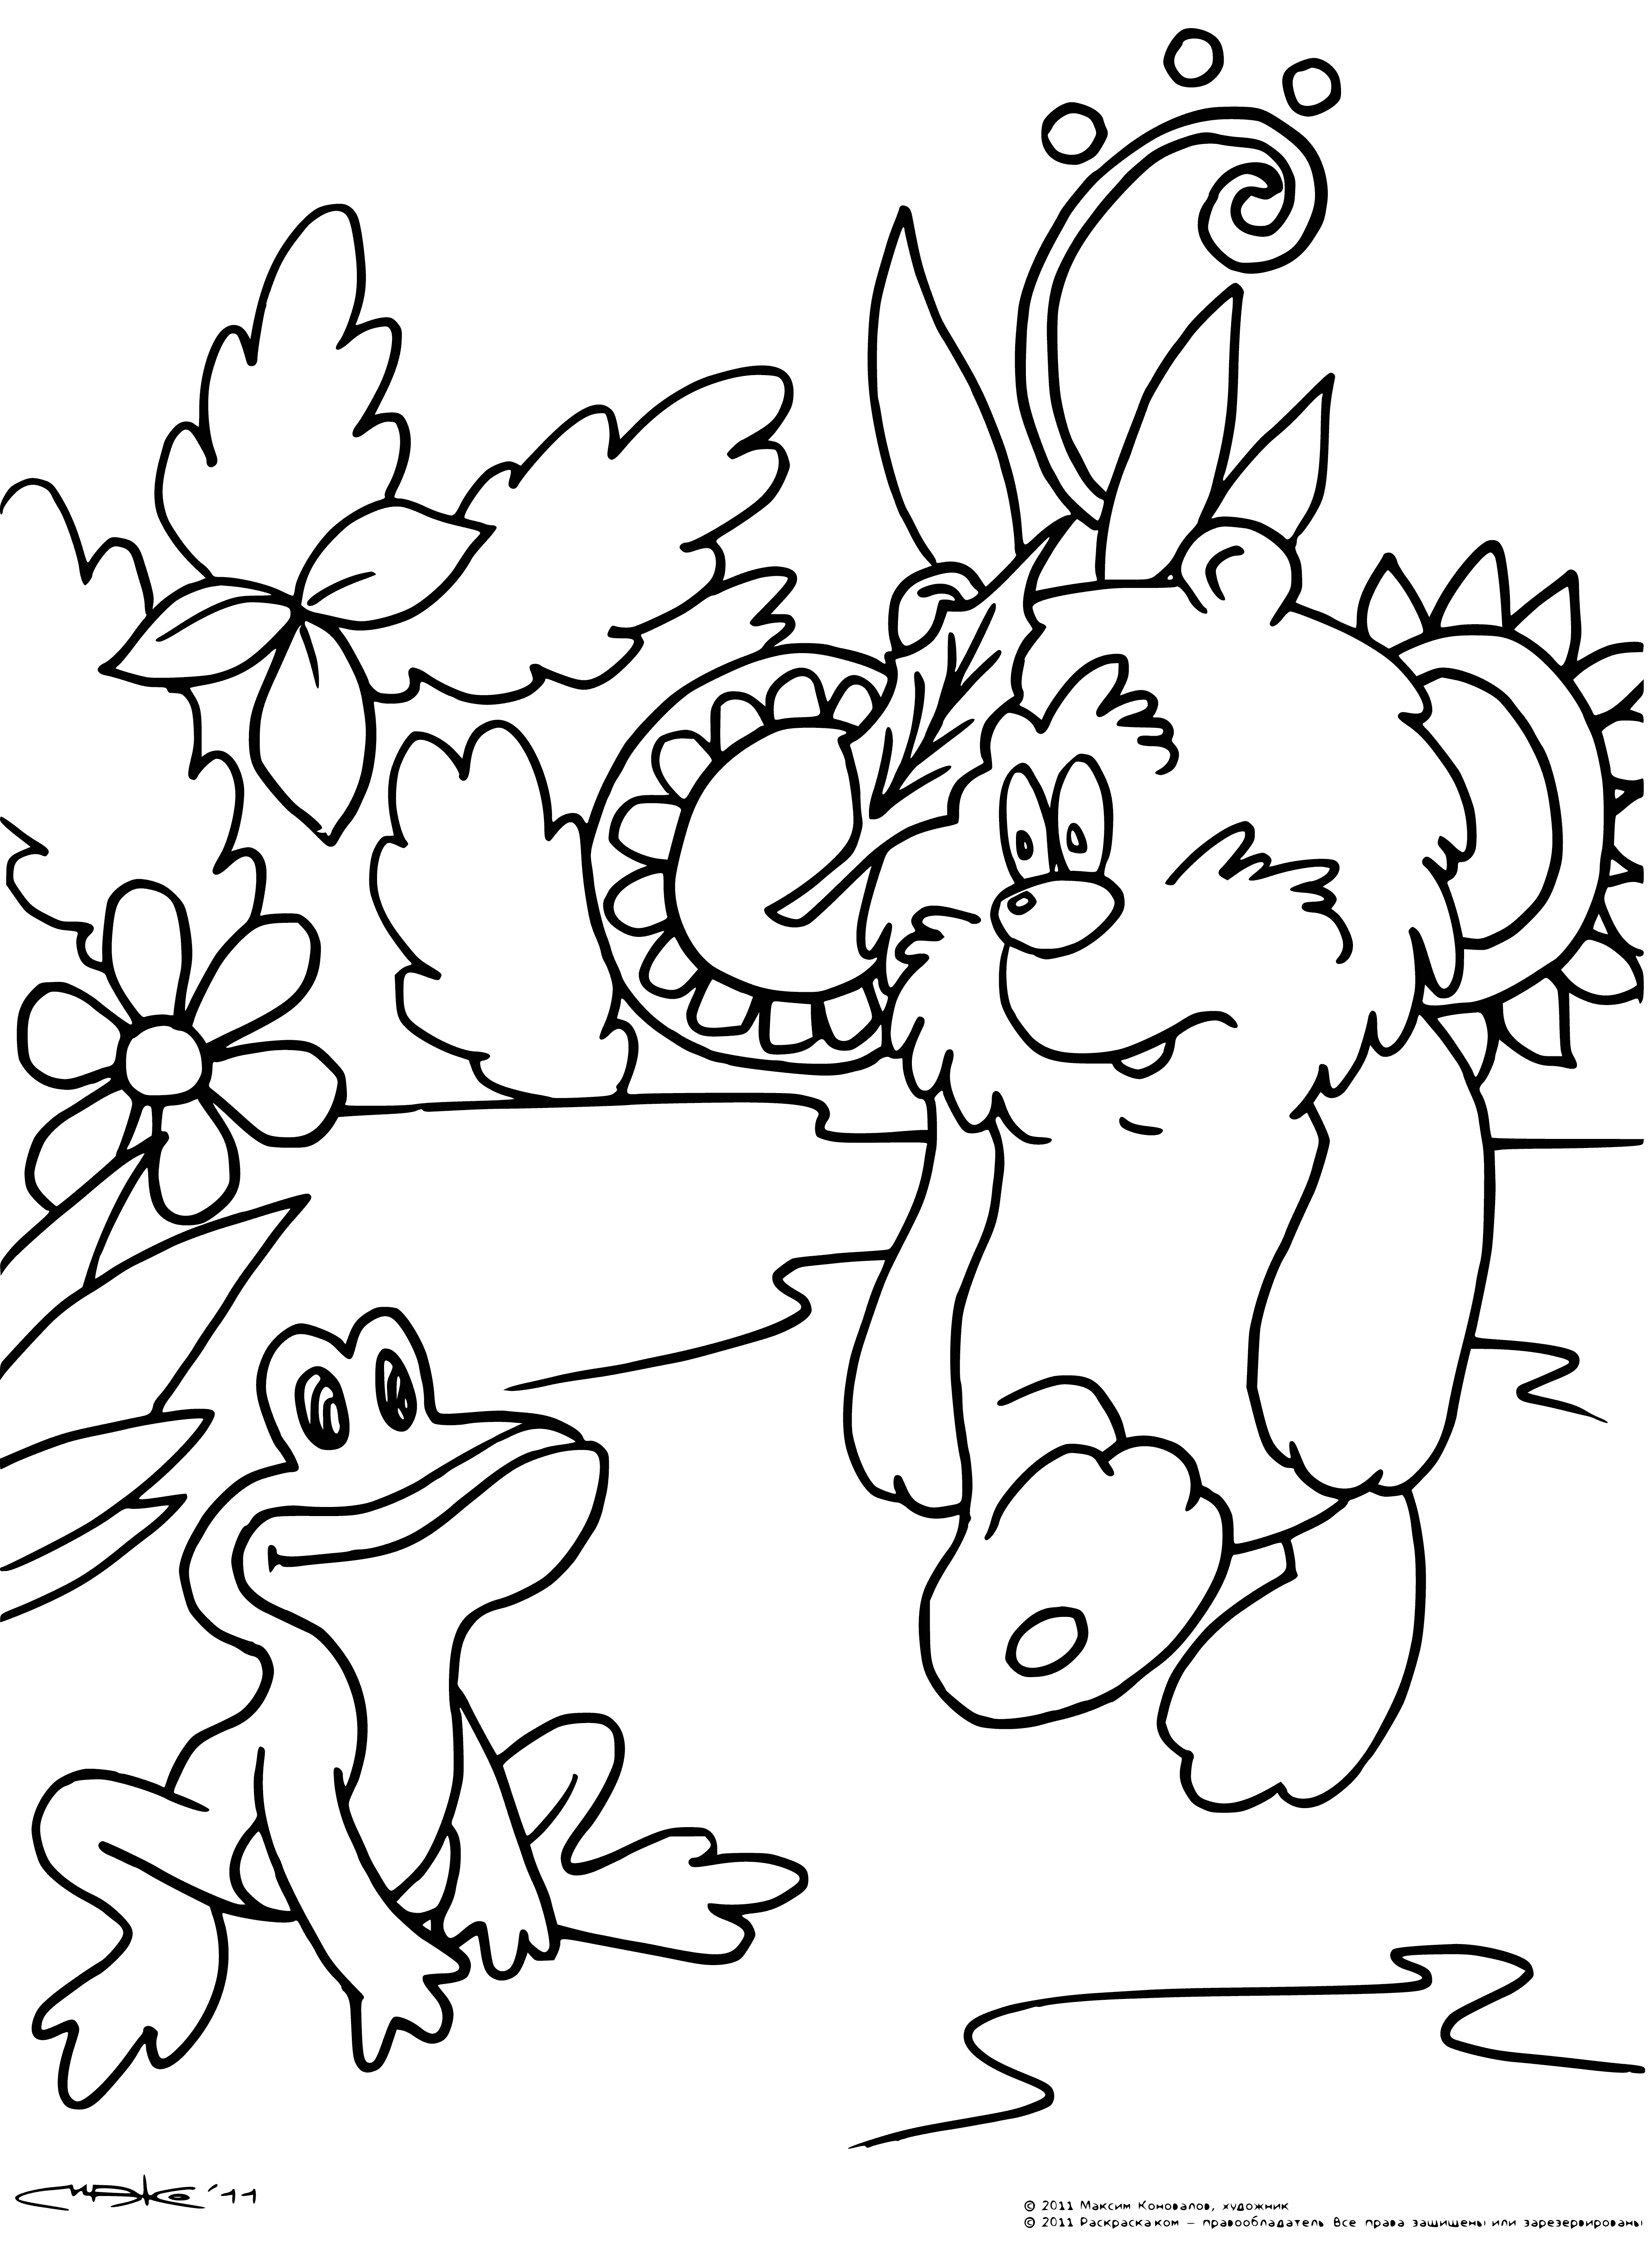 coloring page: A beige teddy bear wearing a brown ribbon sits on a green frog with a happy expression in a yellow background! #coloringpage